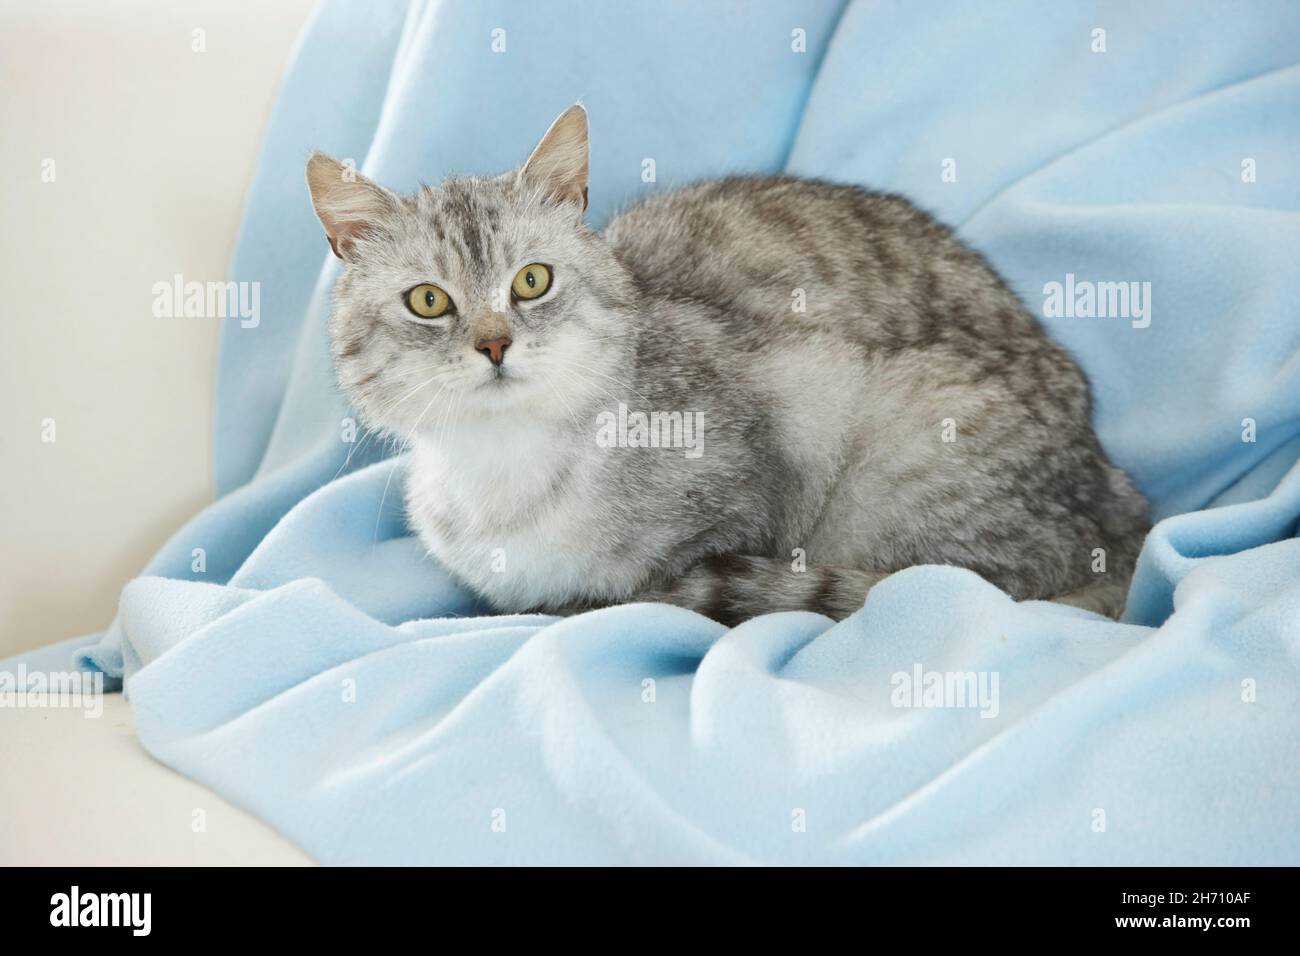 Domestic cat. Tabby adult on a light-blue blanket. Germany Stock Photo